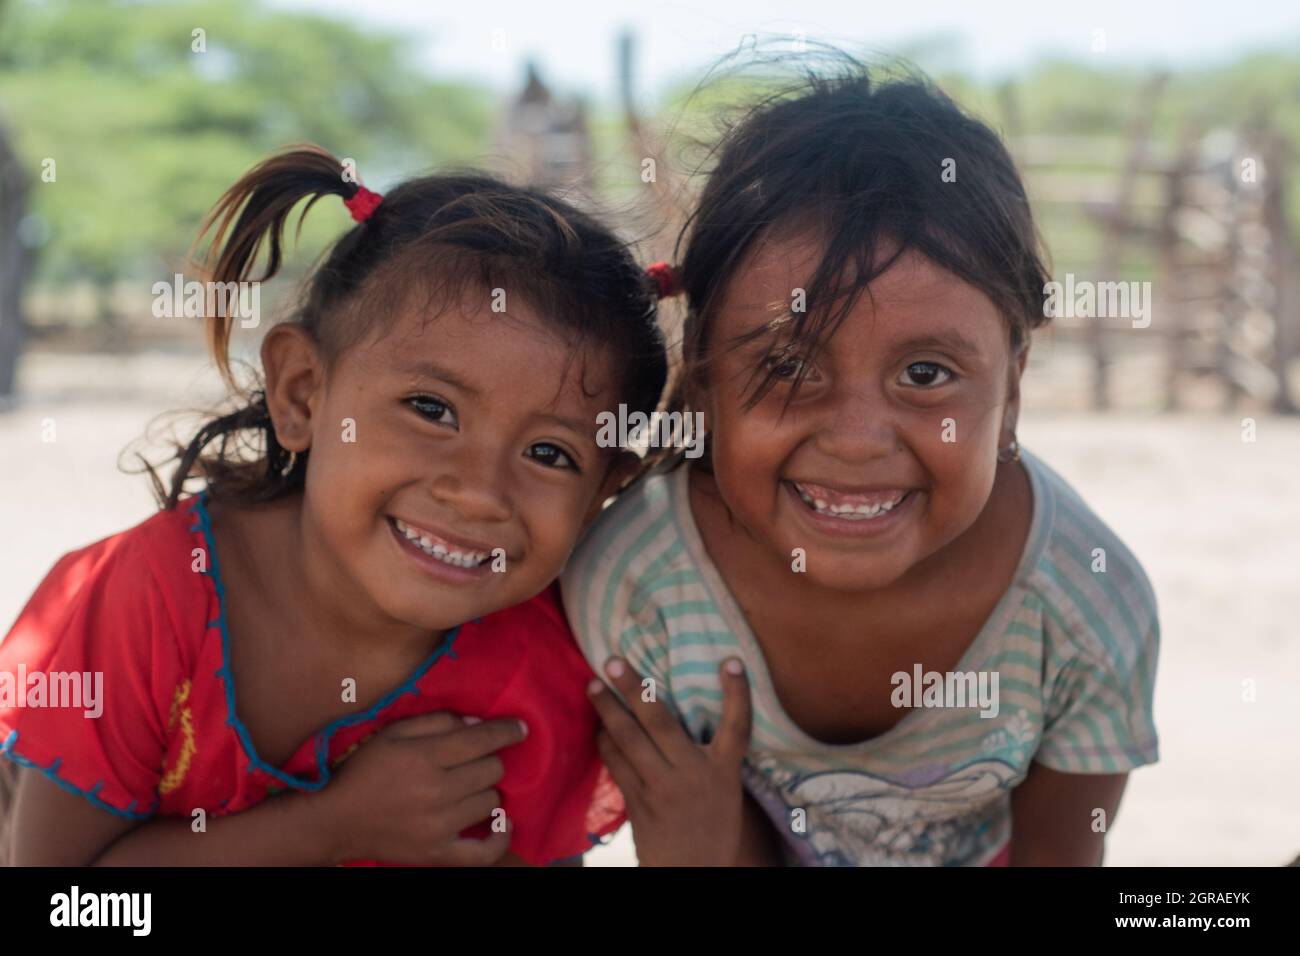 Mayapo, Colombia. 26th Sep, 2021. Two Wayuu indigenous community childs pose for a photo during a Humanitarian Mission developed by 'De Corazon Guajira' in Mayapo at La Guajira - Colombia were they visited the Wayuu indigenous communities 'Pactalia, Poromana, Perrohuila' on September 26, 2021. The Guajira region in Colombia is the poorest region in Colombia, with its people commongly living without drinkable water, electricity and food. Credit: Long Visual Press/Alamy Live News Stock Photo